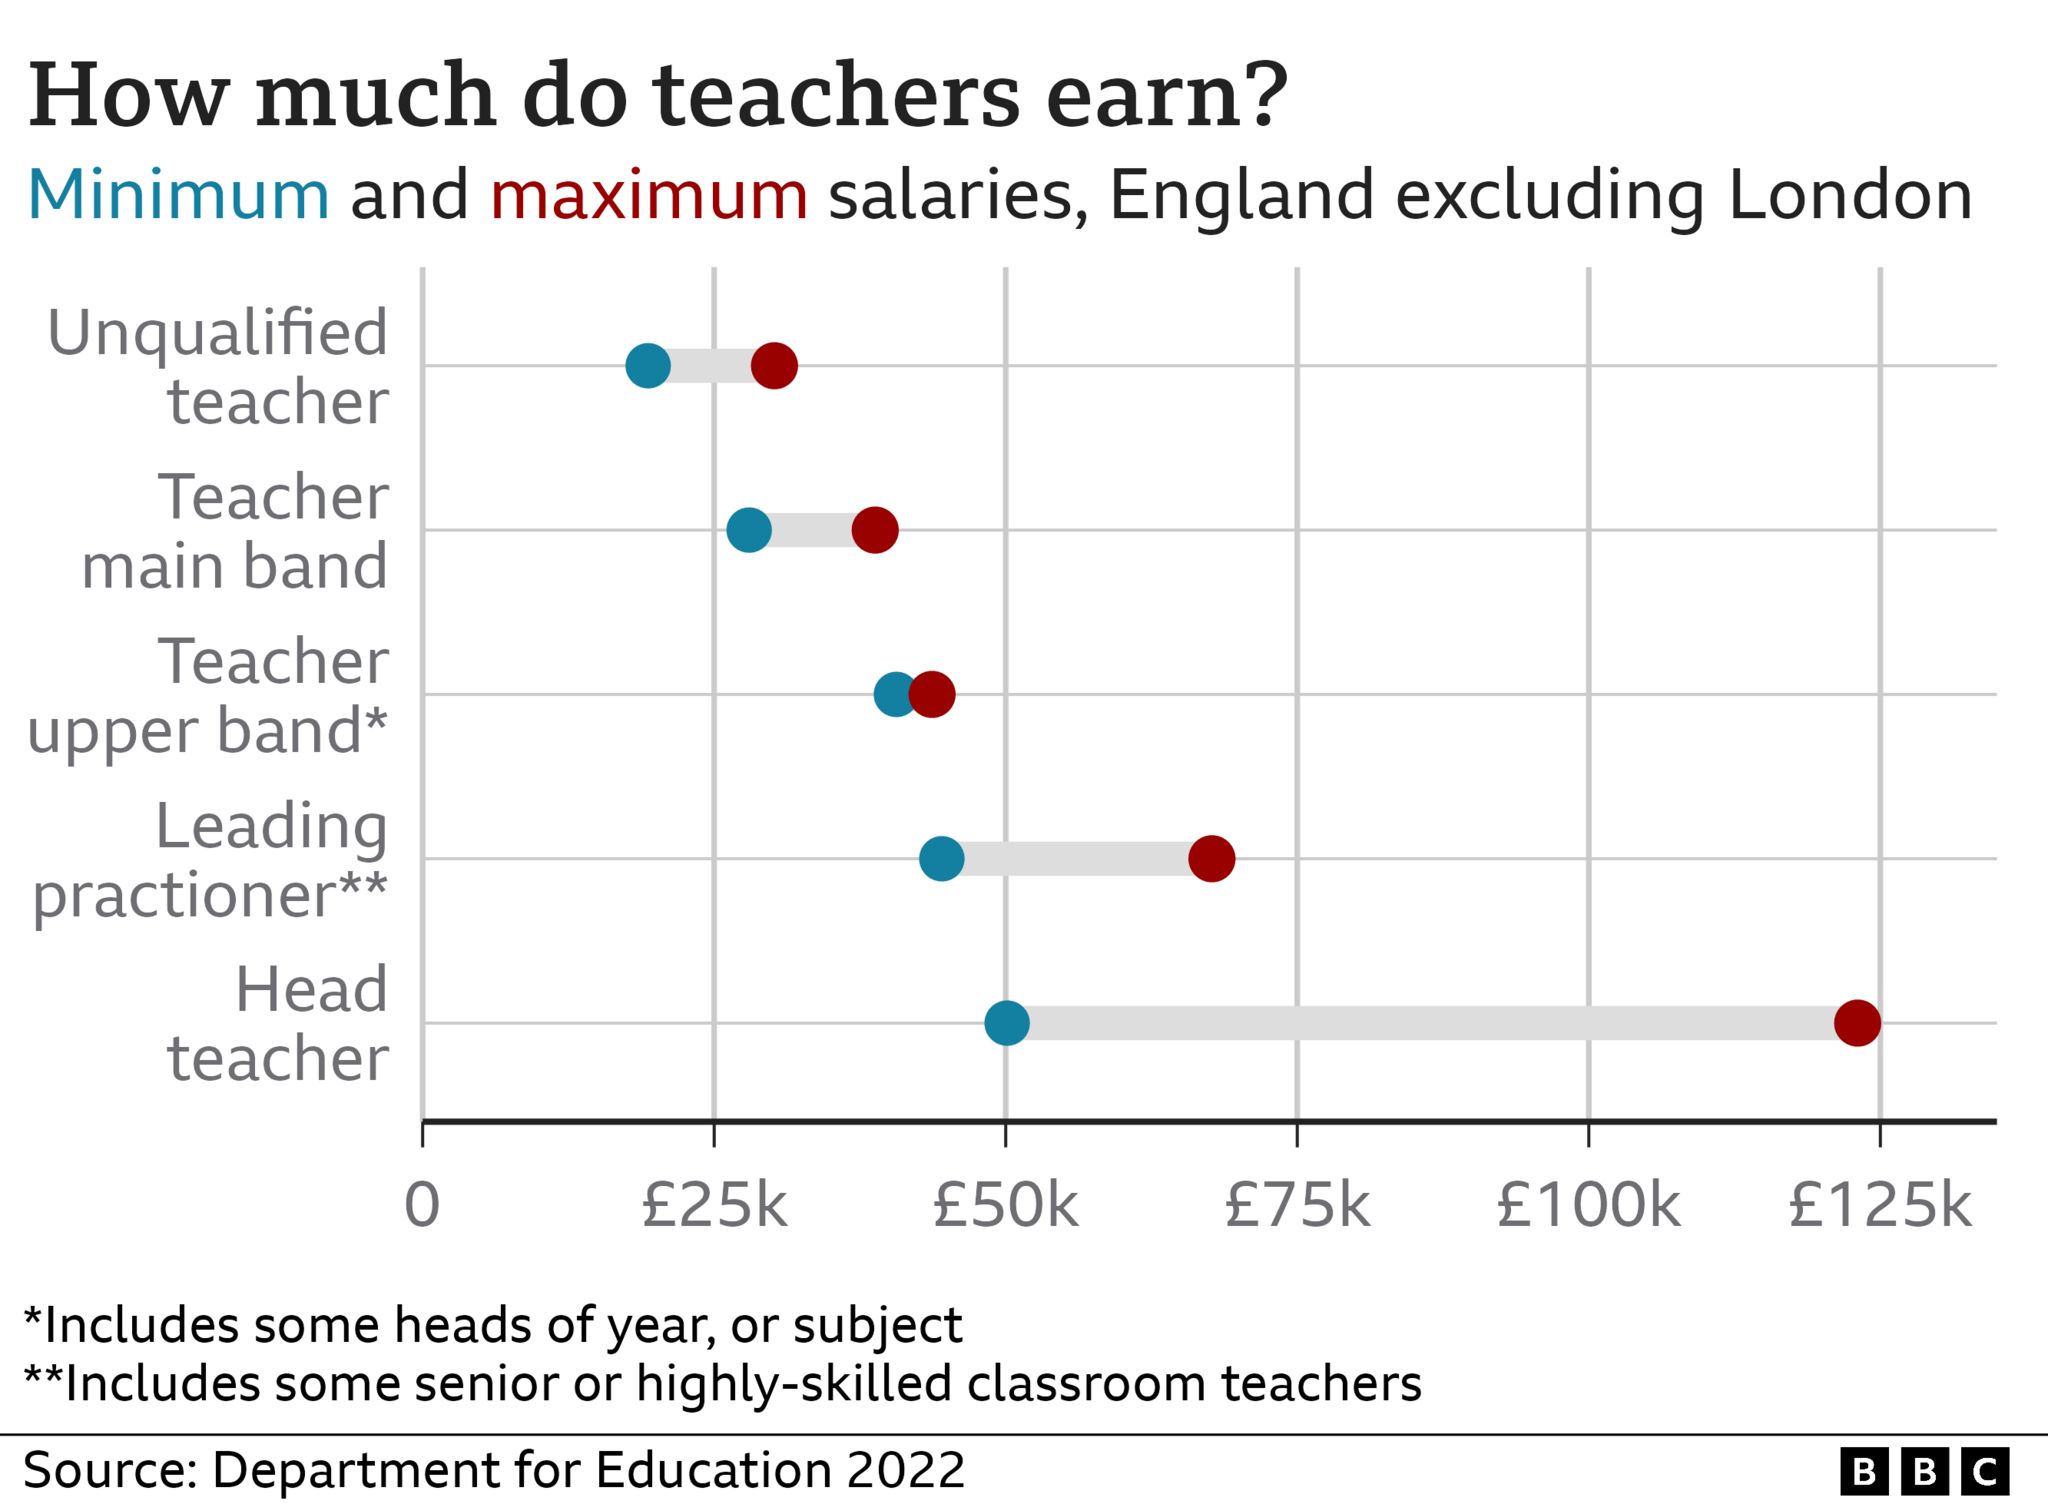 Graphic showing minimum and maximum salaries for teachers in England, outside London